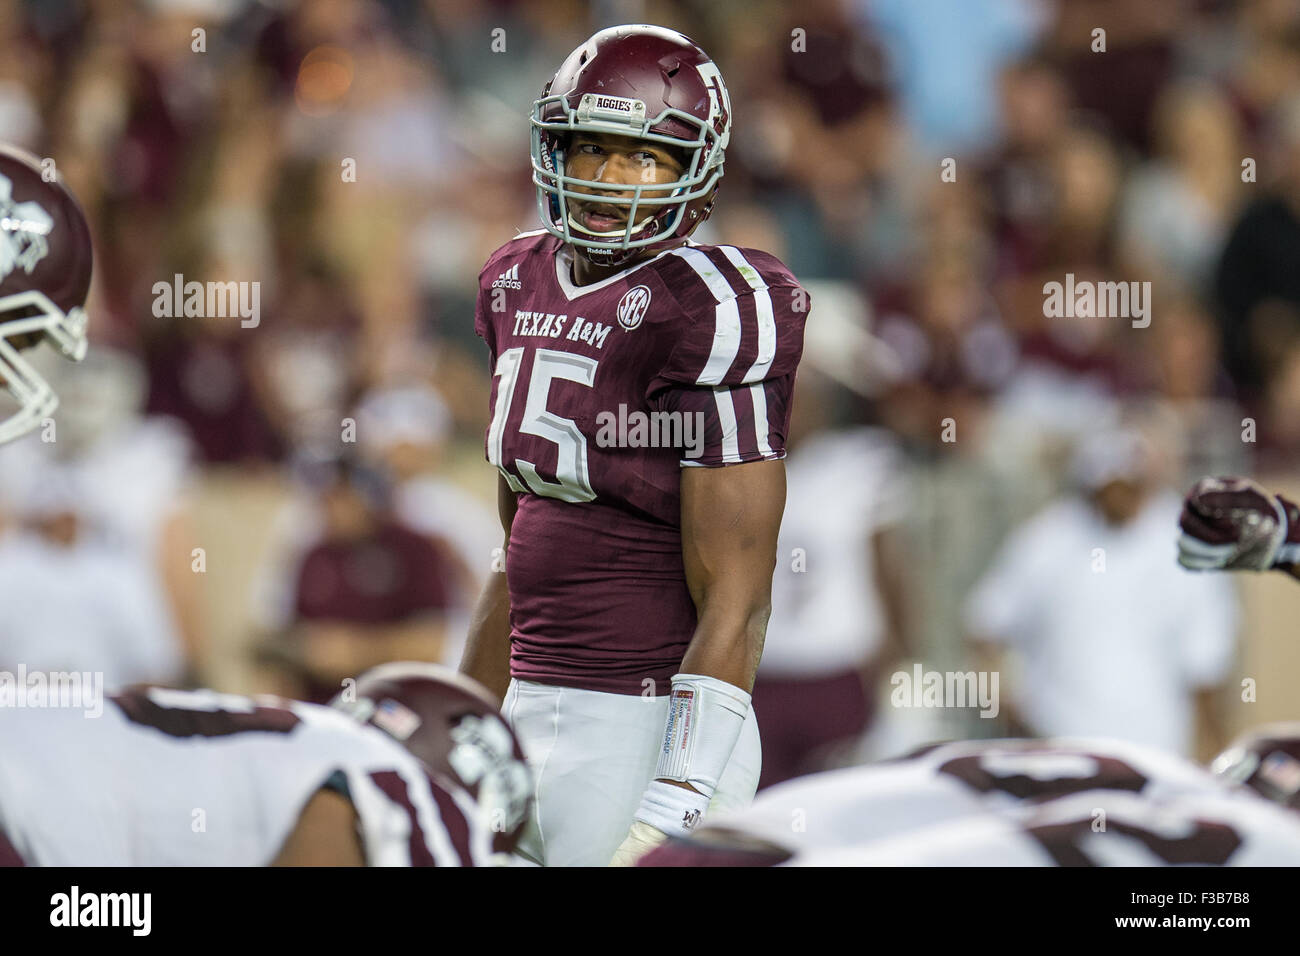 October 3, 2015: Texas A&M Aggies defensive lineman Myles Garrett (15) during the 4th quarter of an NCAA football game between the Mississippi State Bulldogs and the Texas A&M Aggies at Kyle Field in College Station, TX. The Aggies won 30-17.Trask Smith/CSM Stock Photo